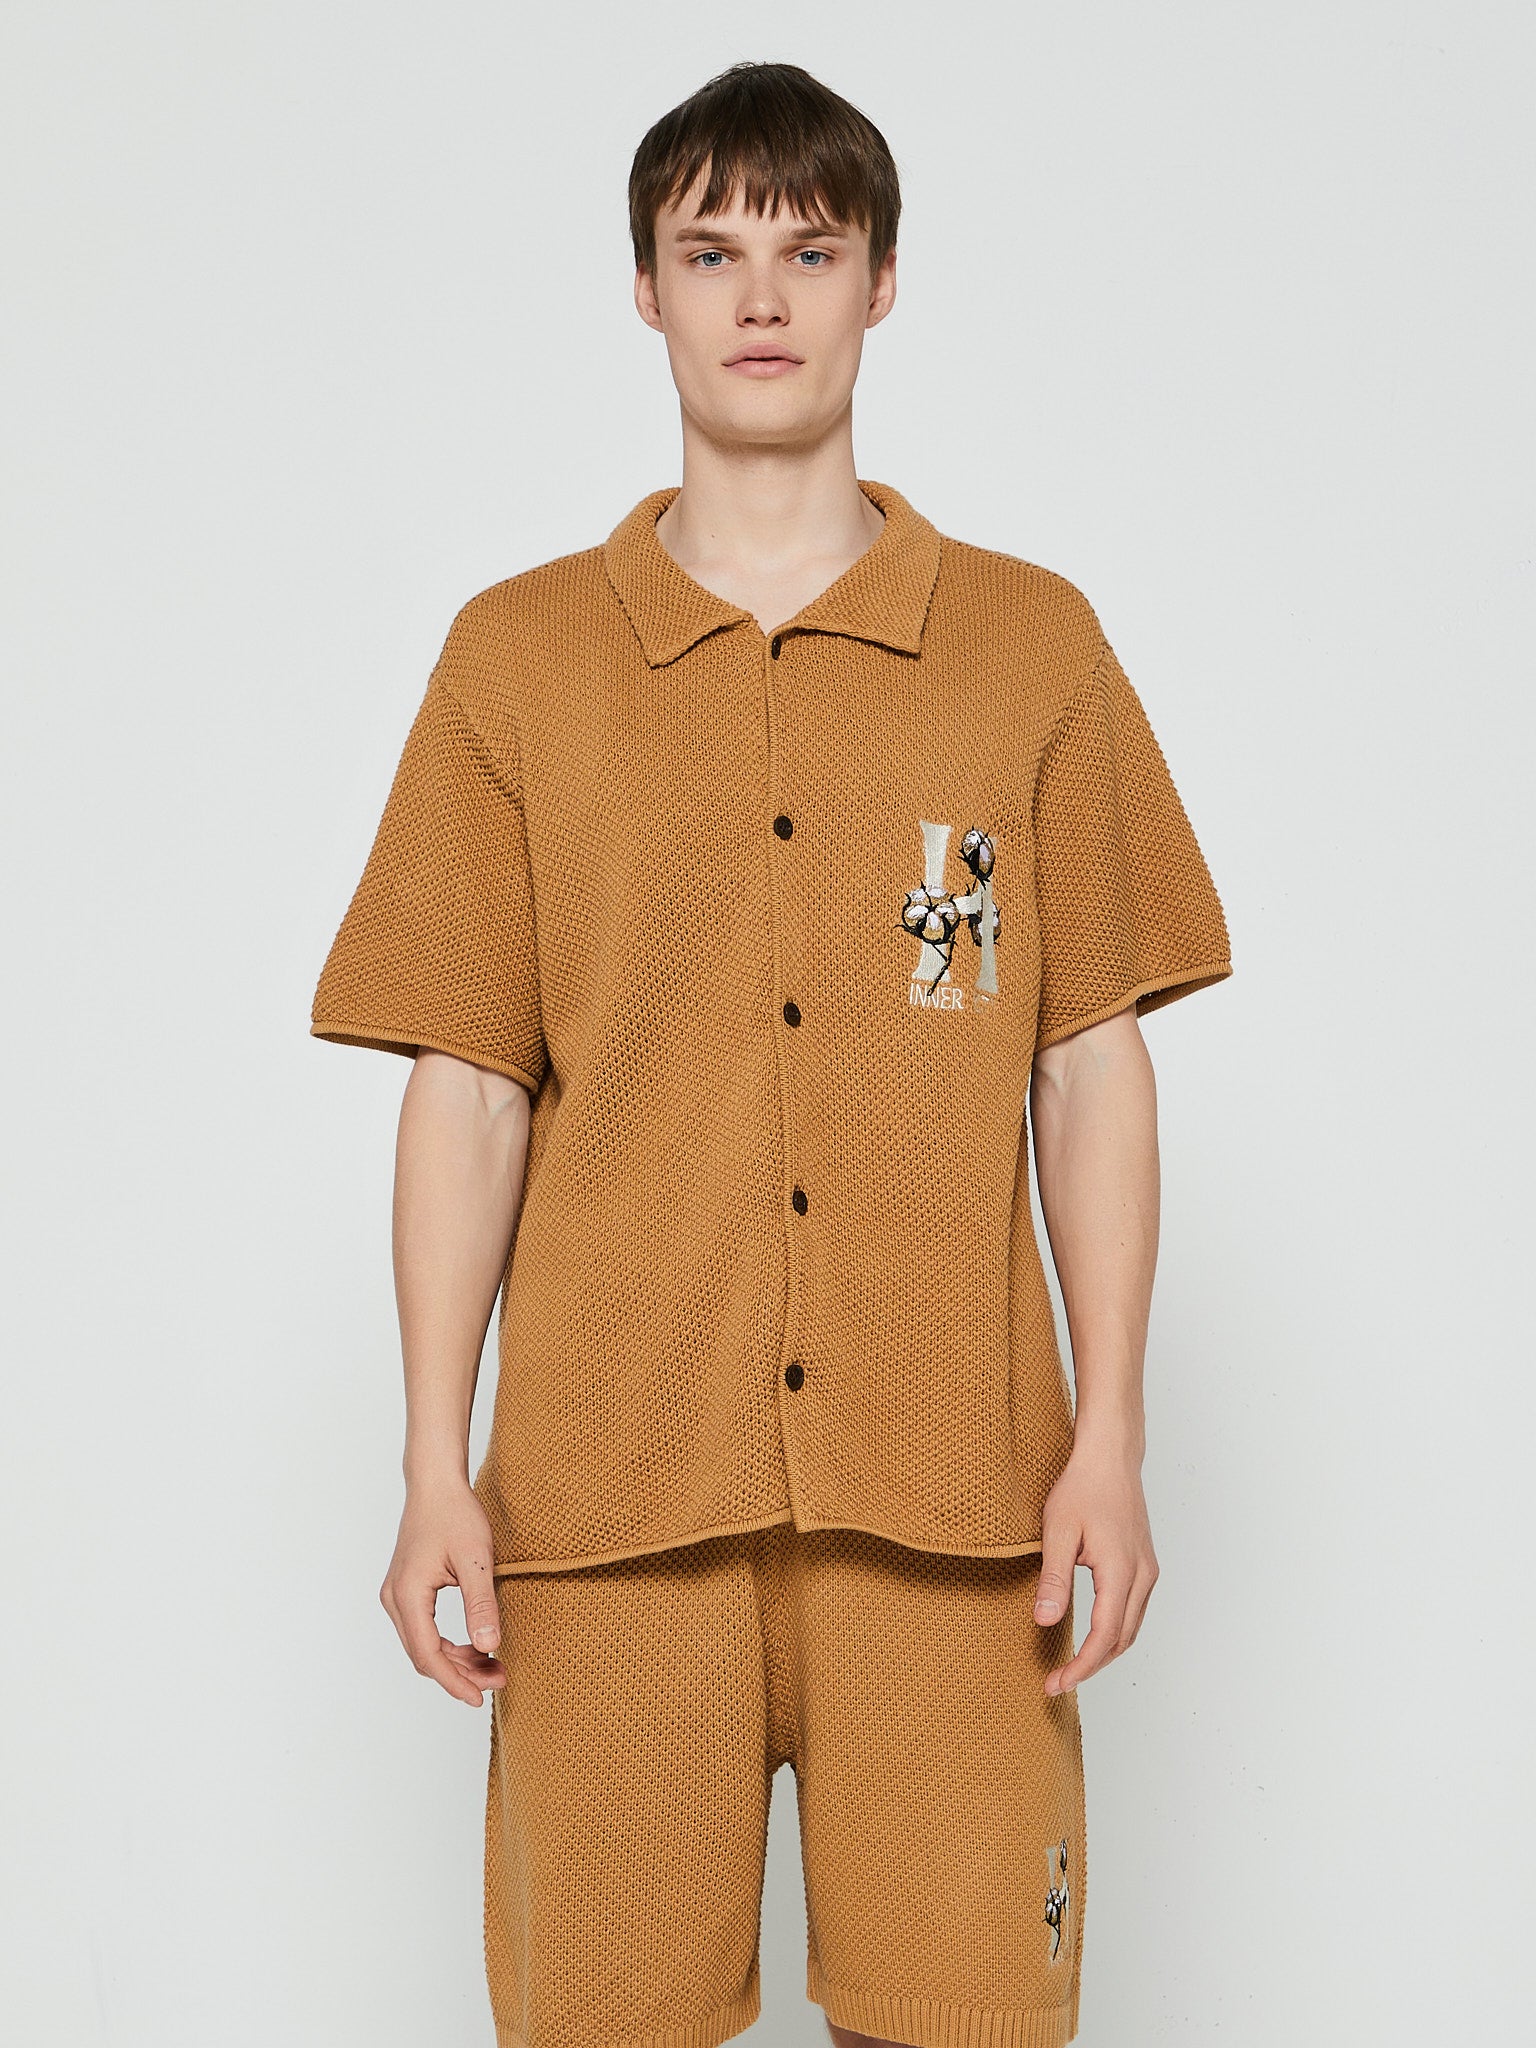 Honor The Gift - Knit H Short Sleeved Button Up Shirt in Caramel